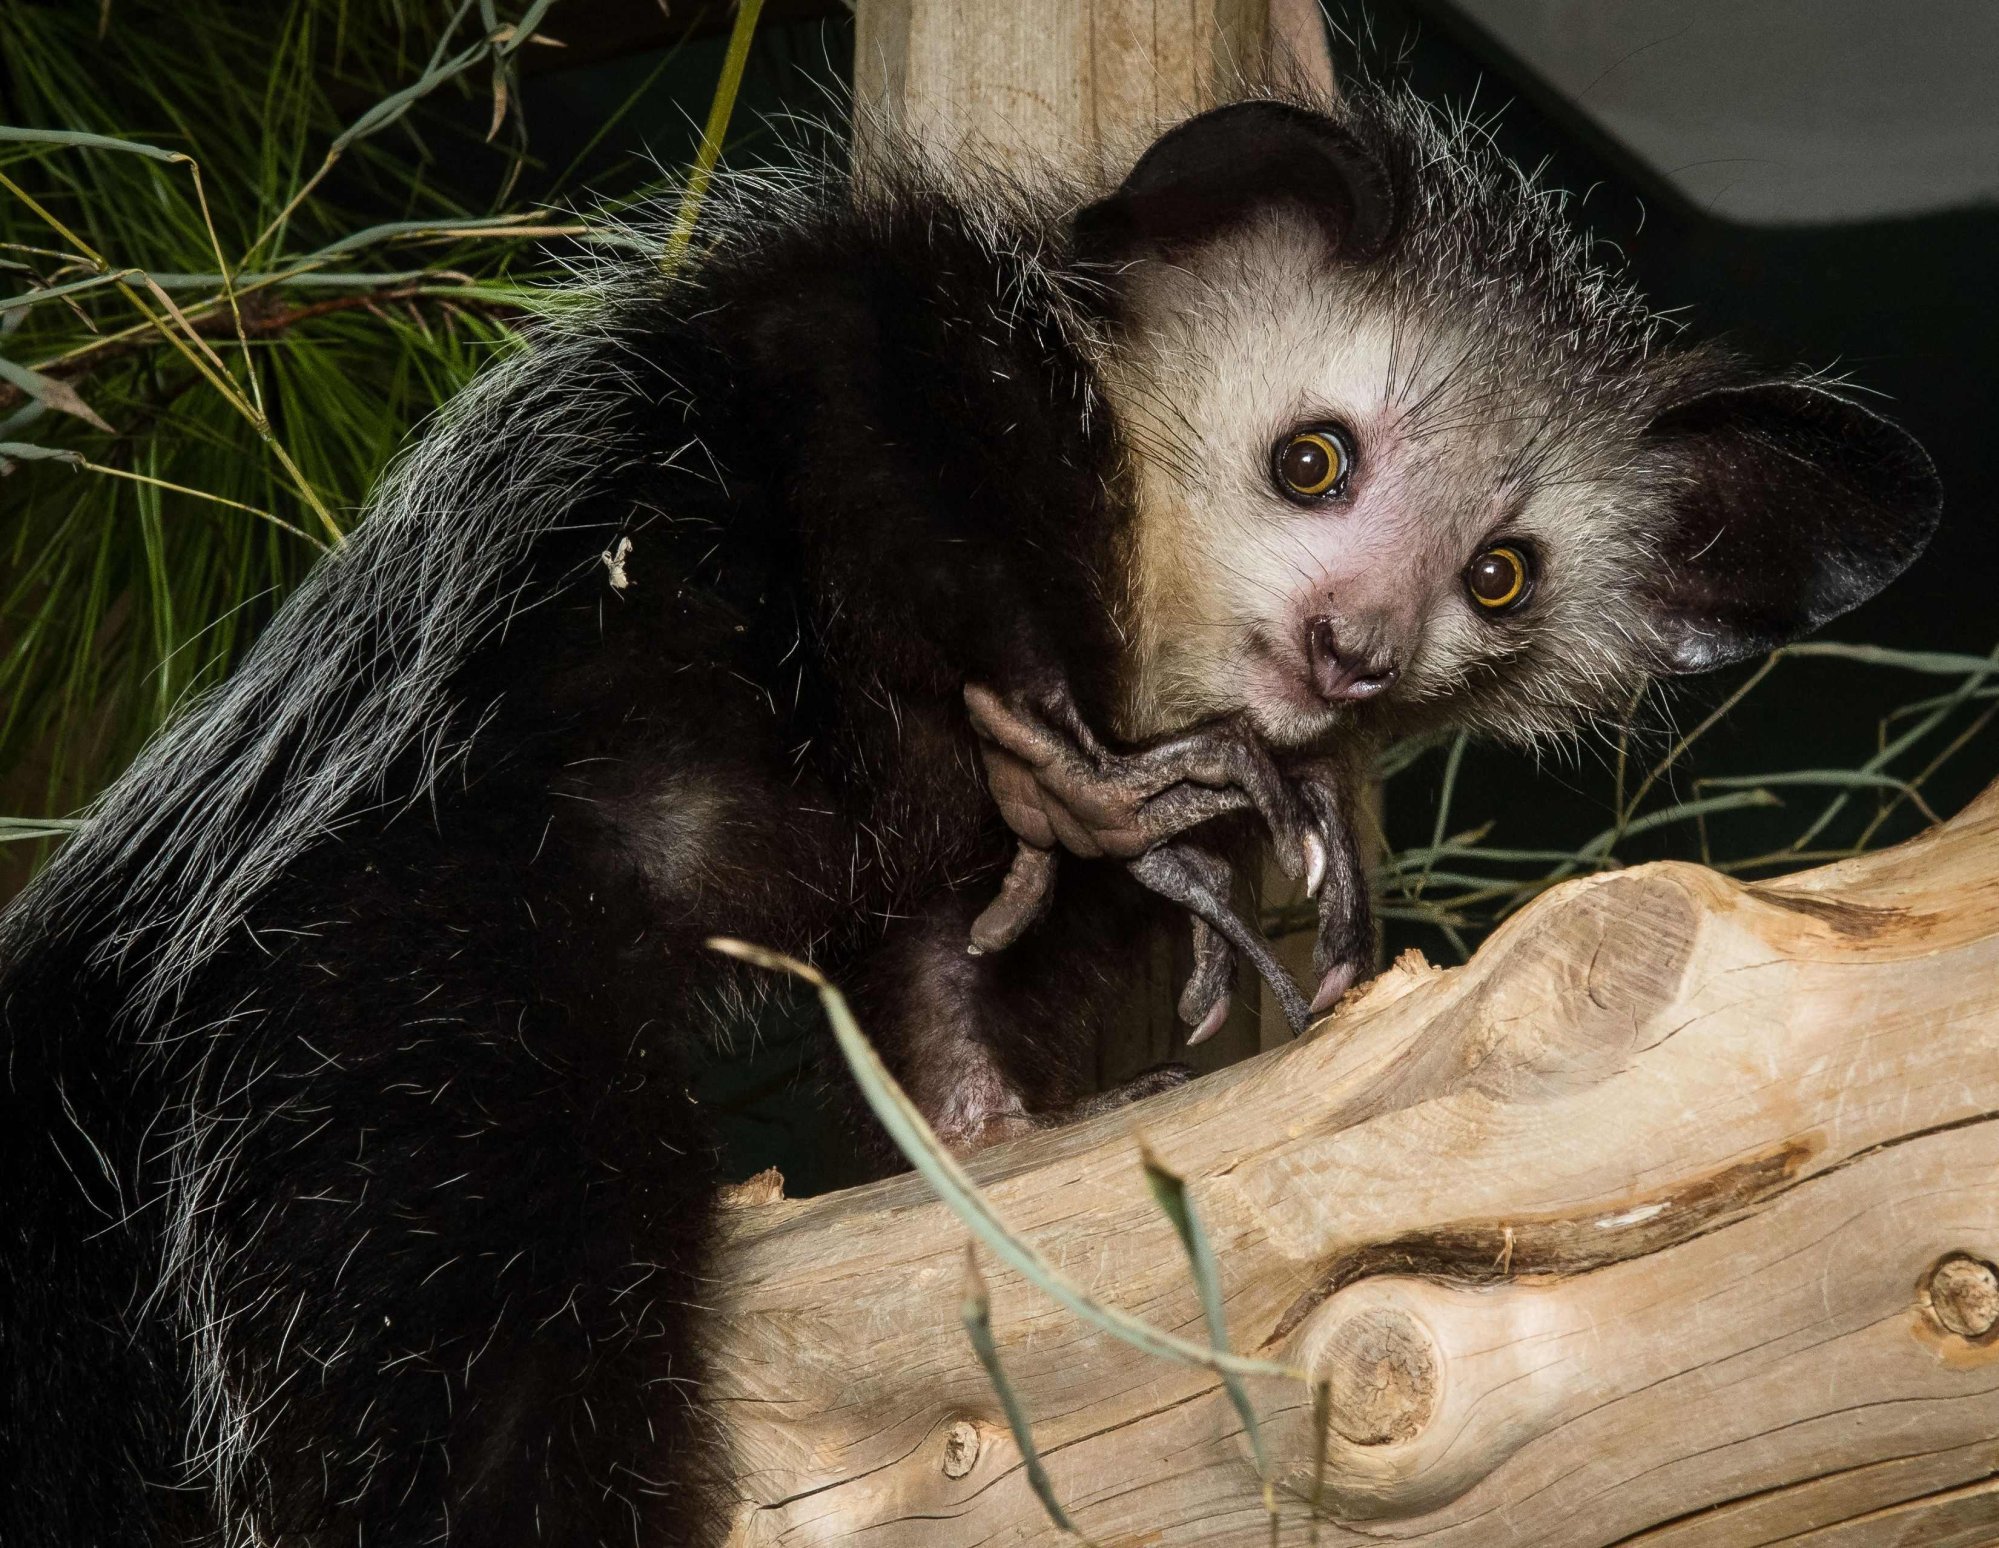 Aye-aye recorded picking nose and eating snot for the first time